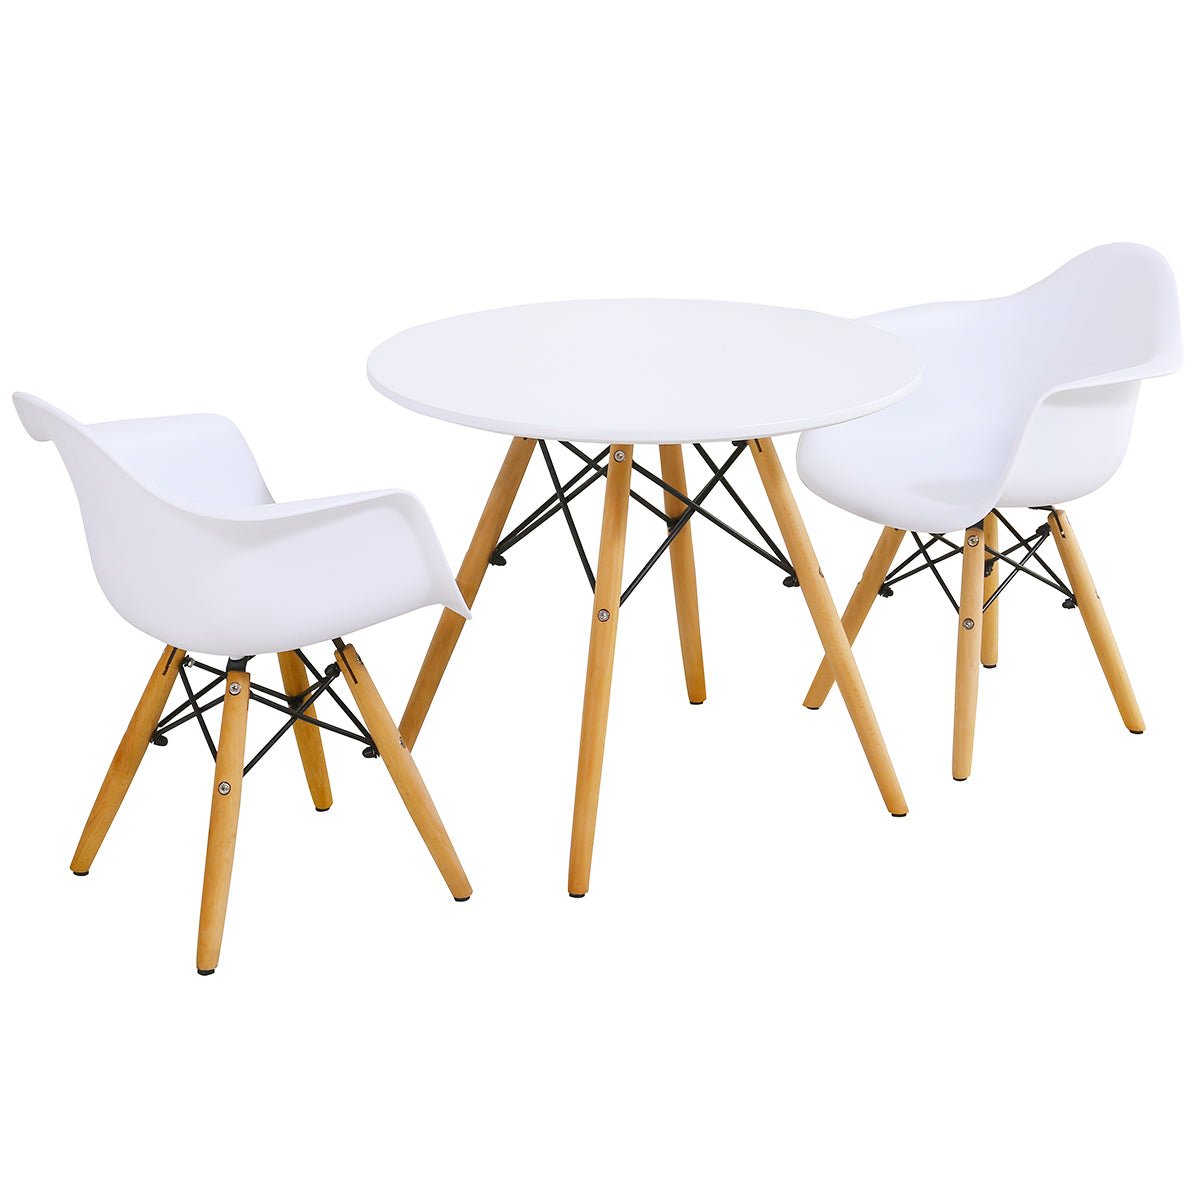 Versatile 3-Piece Kids Table and Chairs Set - Explore, Create, Dine